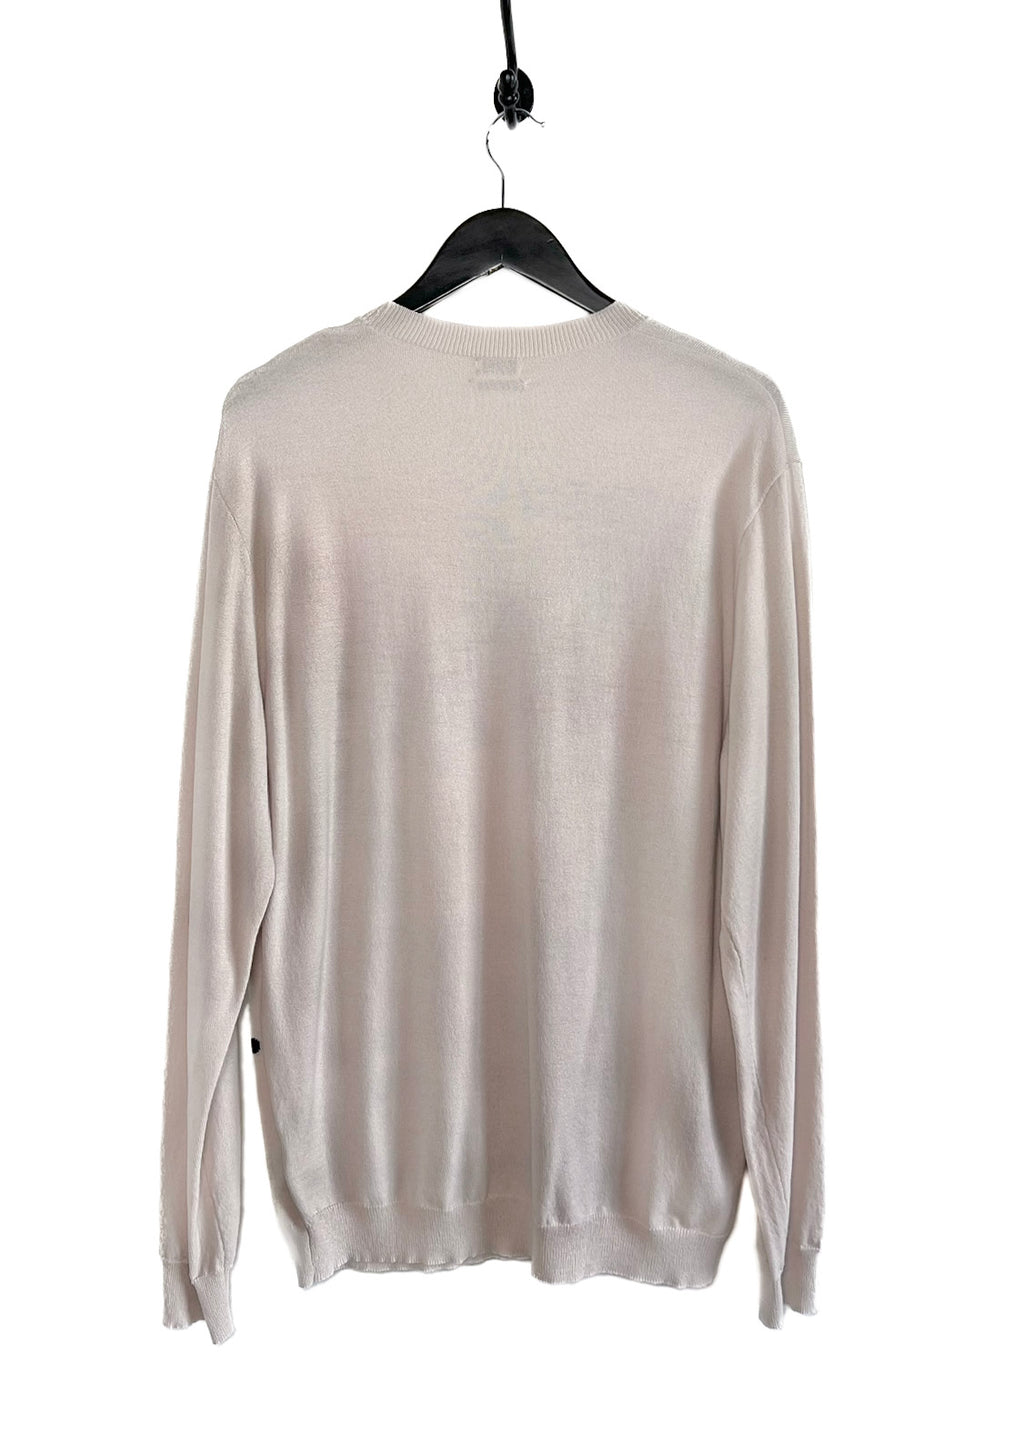 Paul Smith "Independent Mind" Intersia Beige Knit Sweater